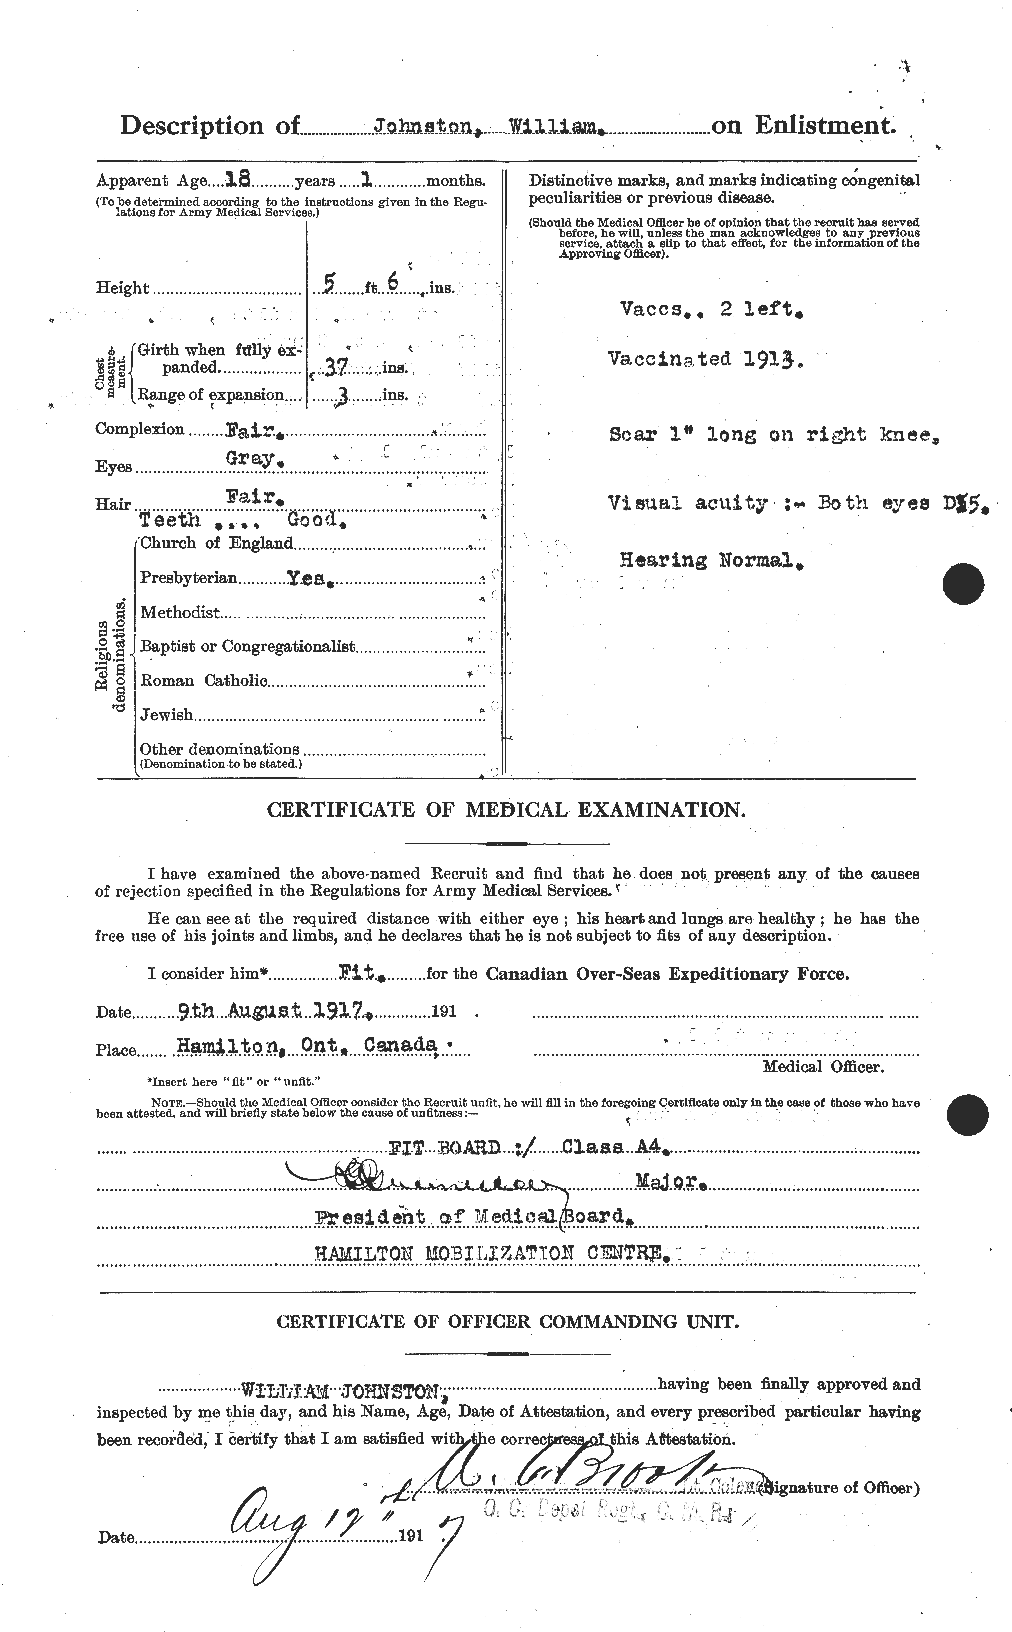 Personnel Records of the First World War - CEF 427268b